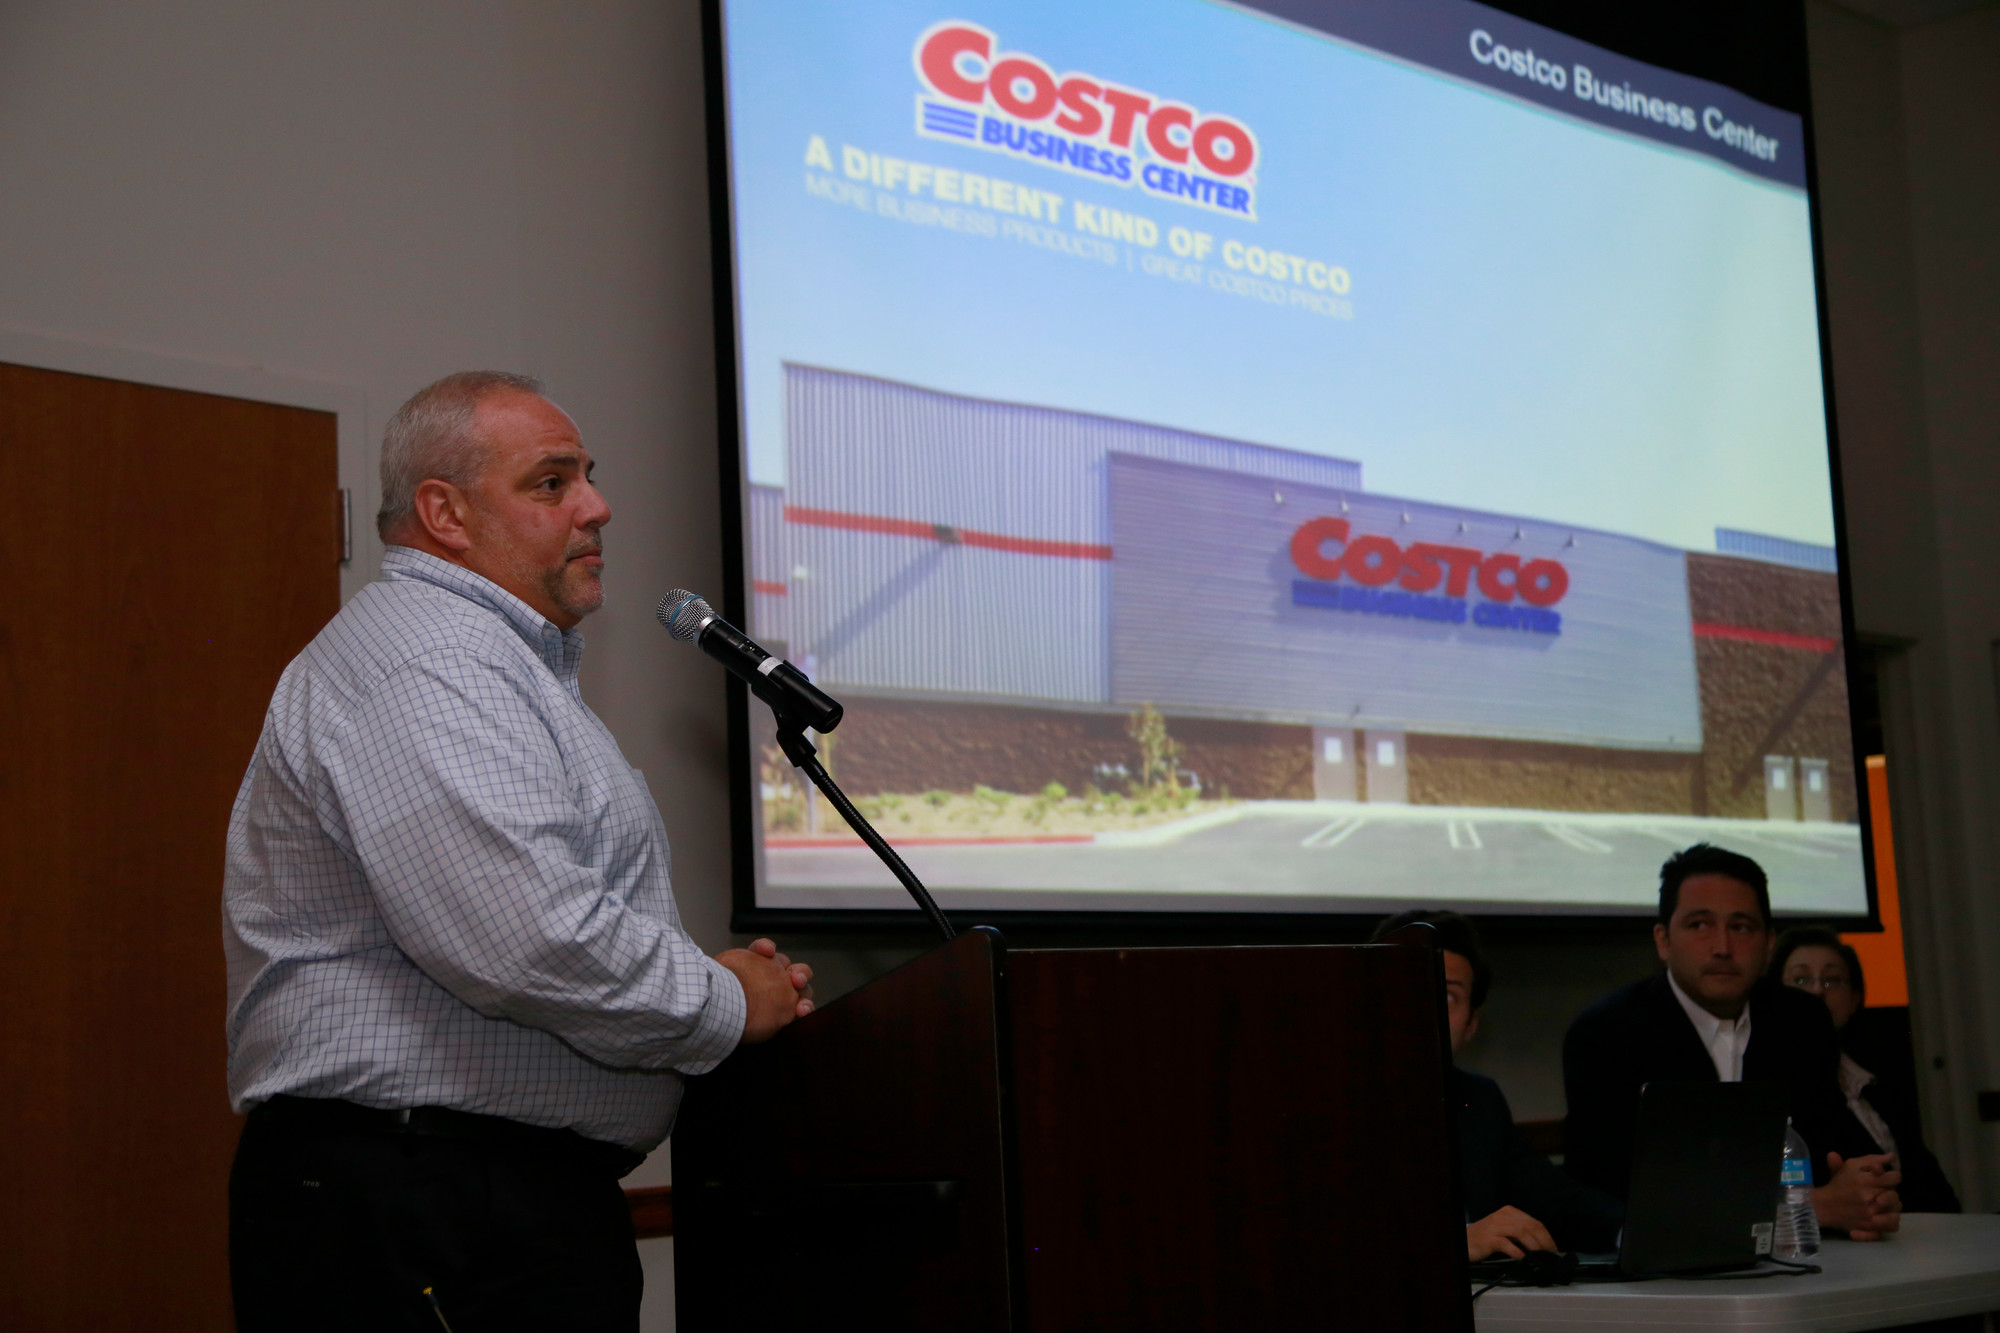 Joe Montesano, left, a representative of Costco, explained the impact that the retailer would have on the community.